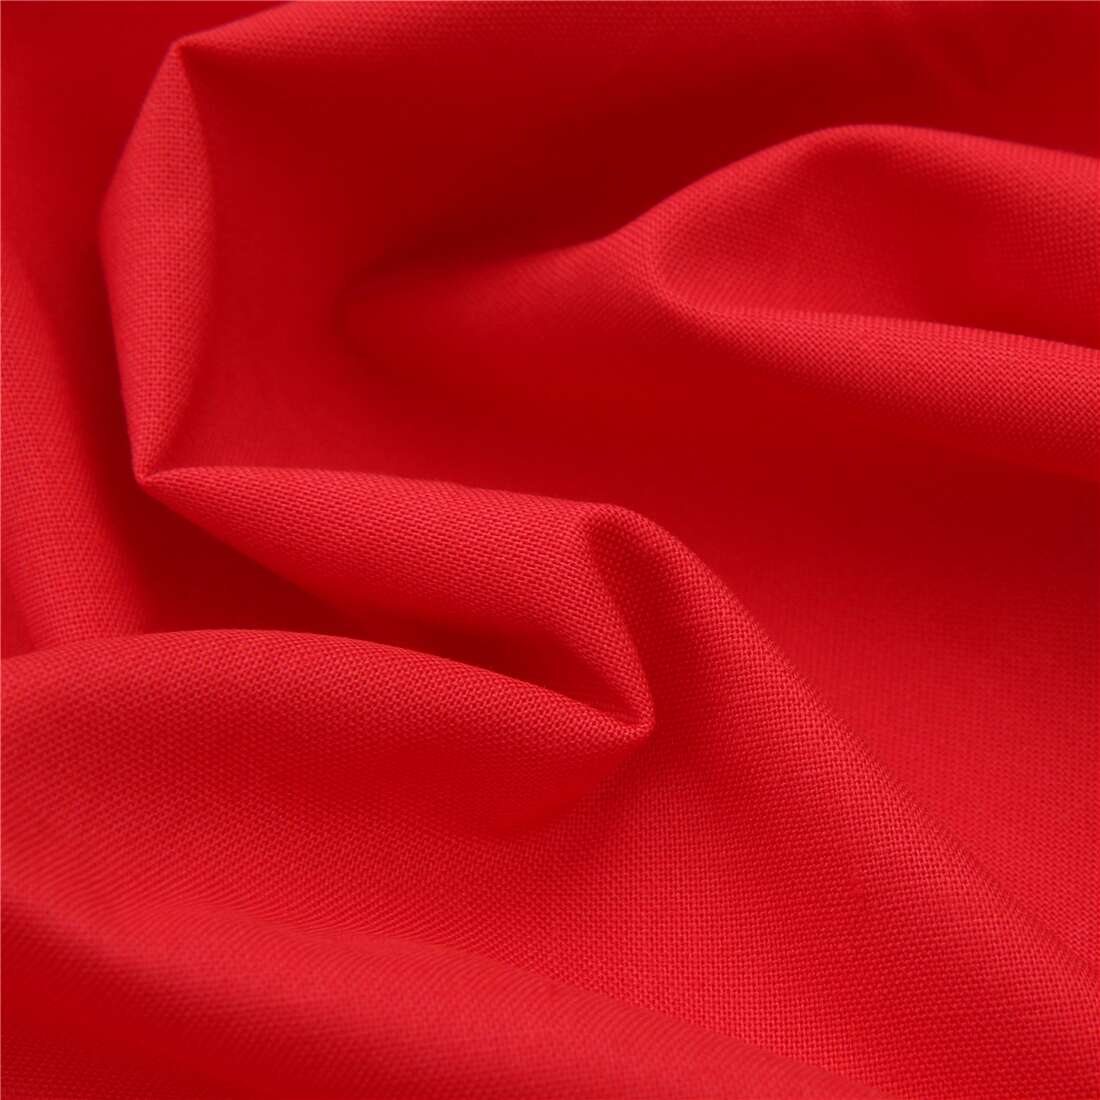 Fabric red